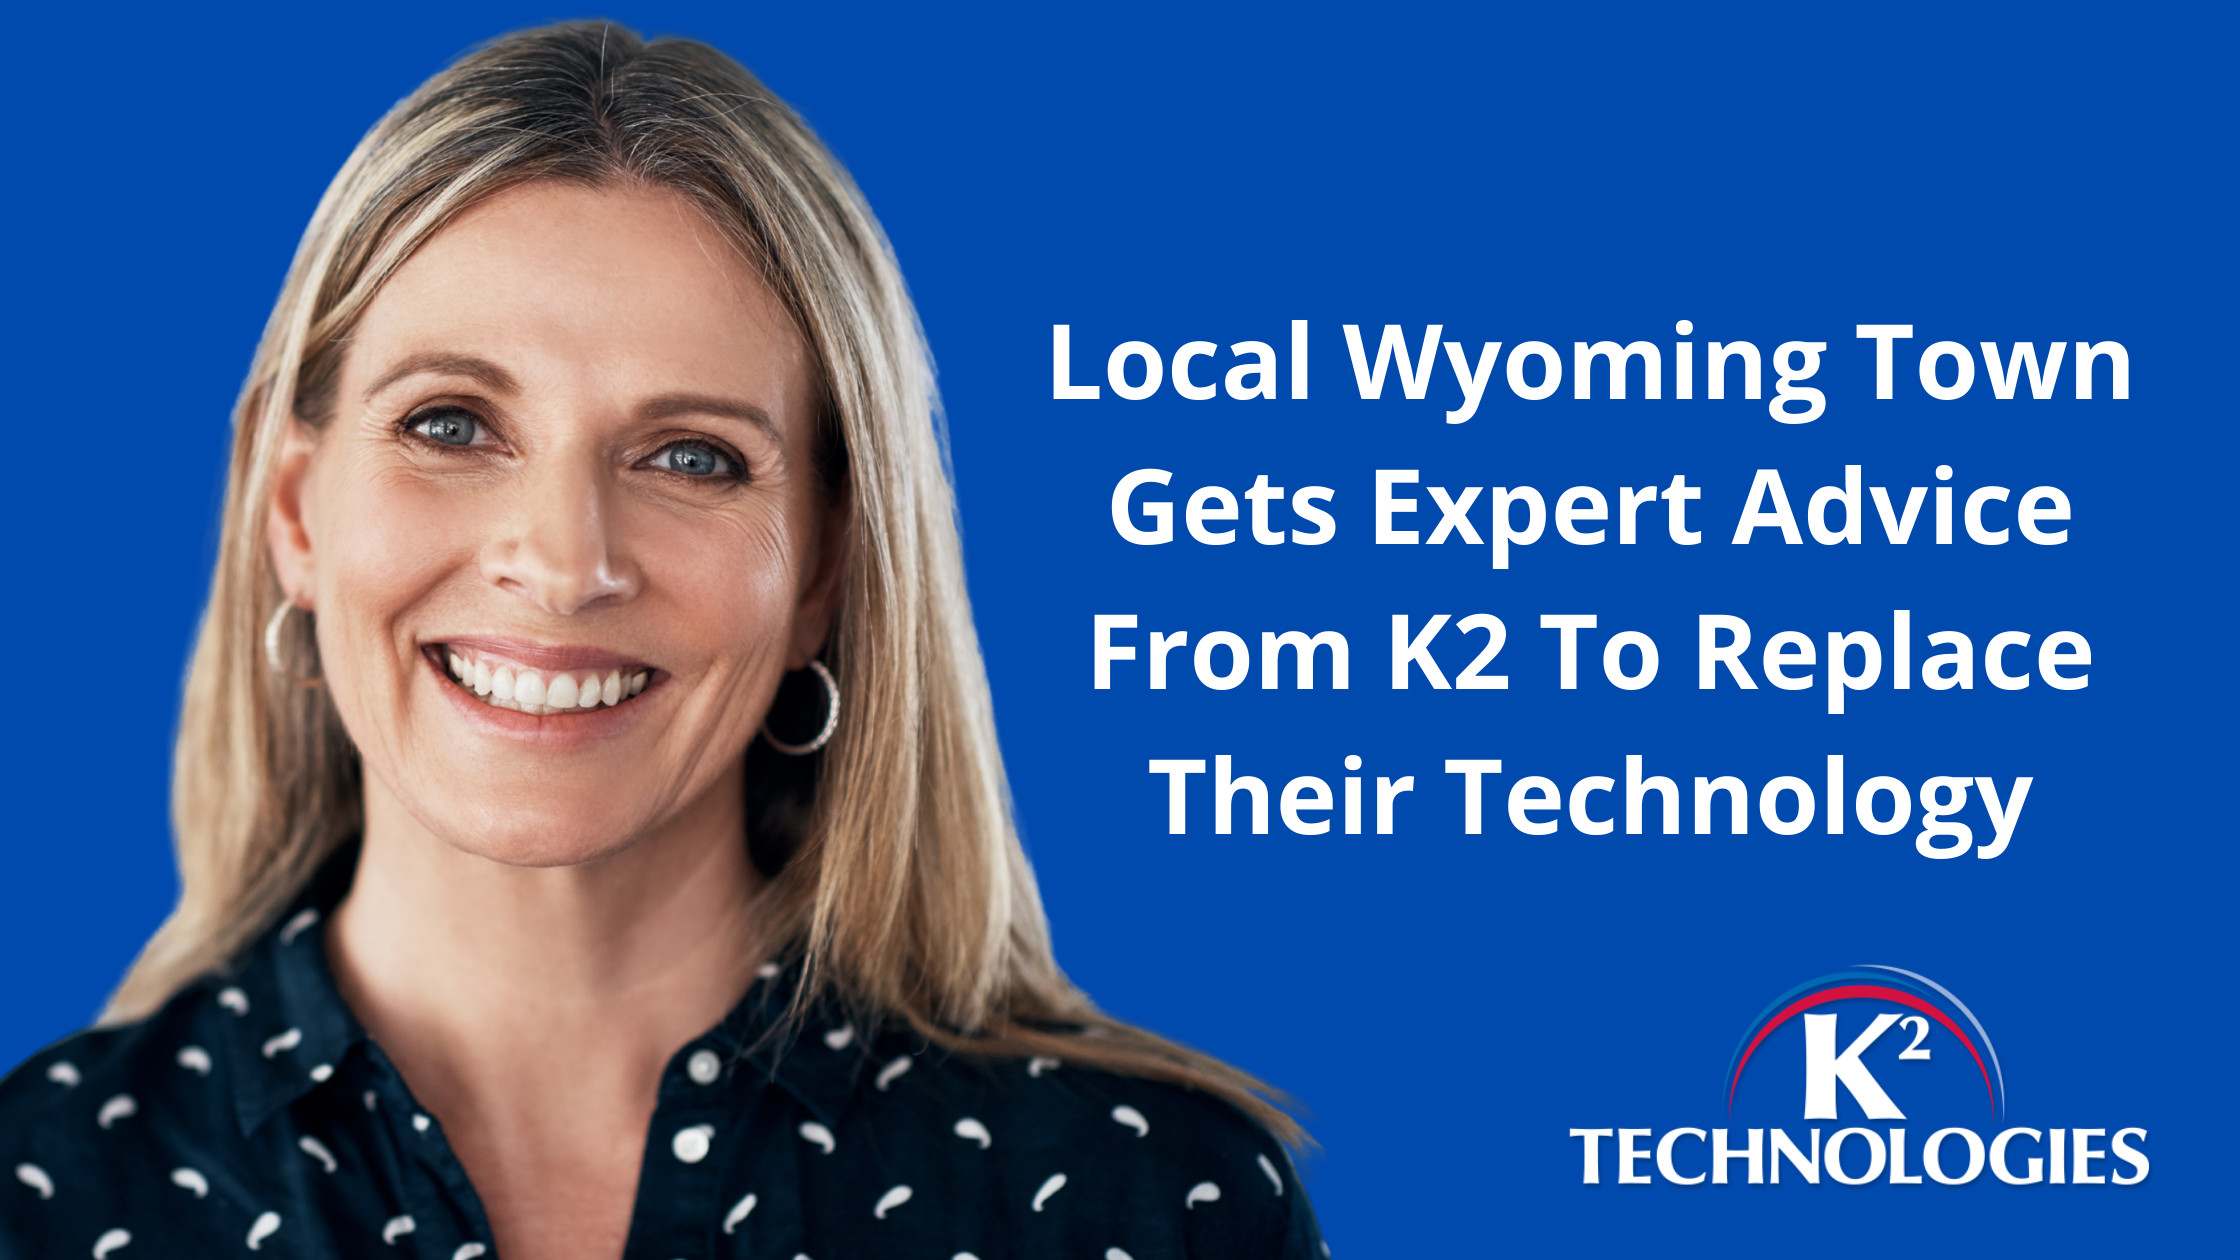 Local Wyoming Town Gets Expert Advice From K2 To Replace Their Technology